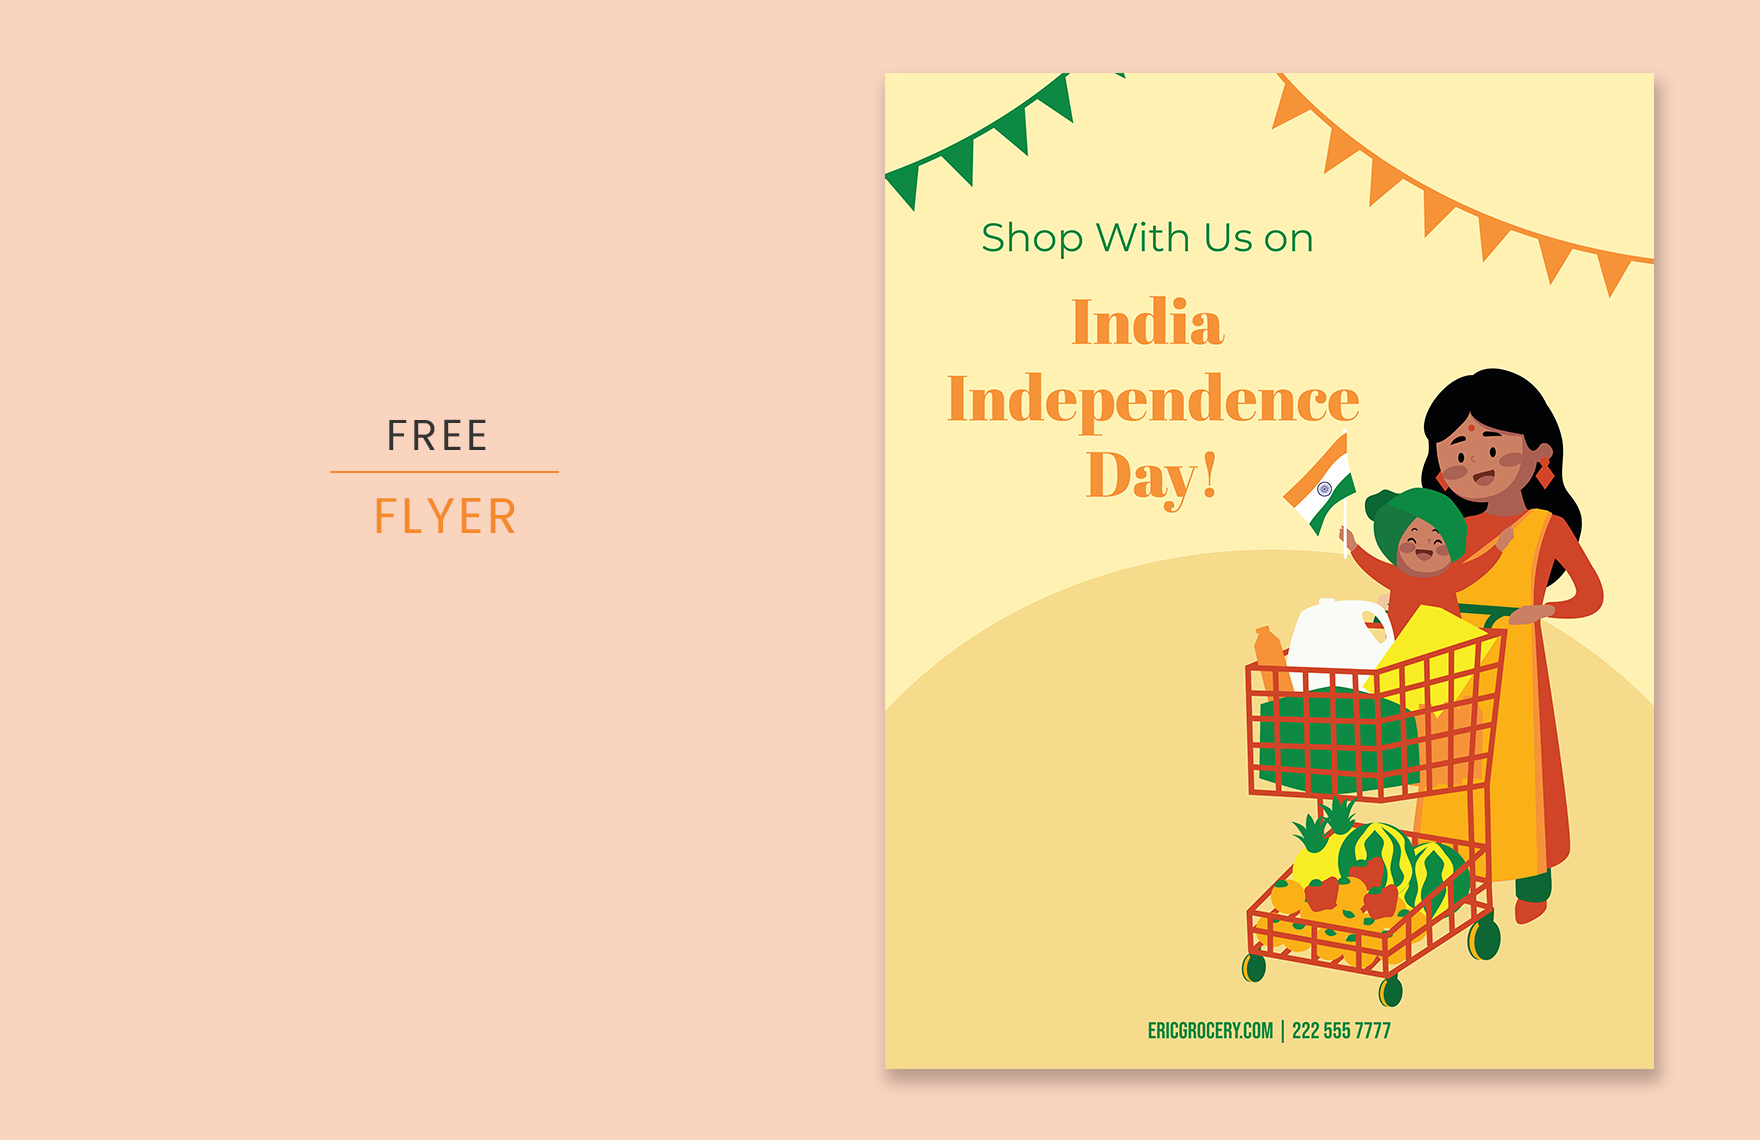 India Independence Day Flyer Template in PDF, Illustrator, SVG, JPEG